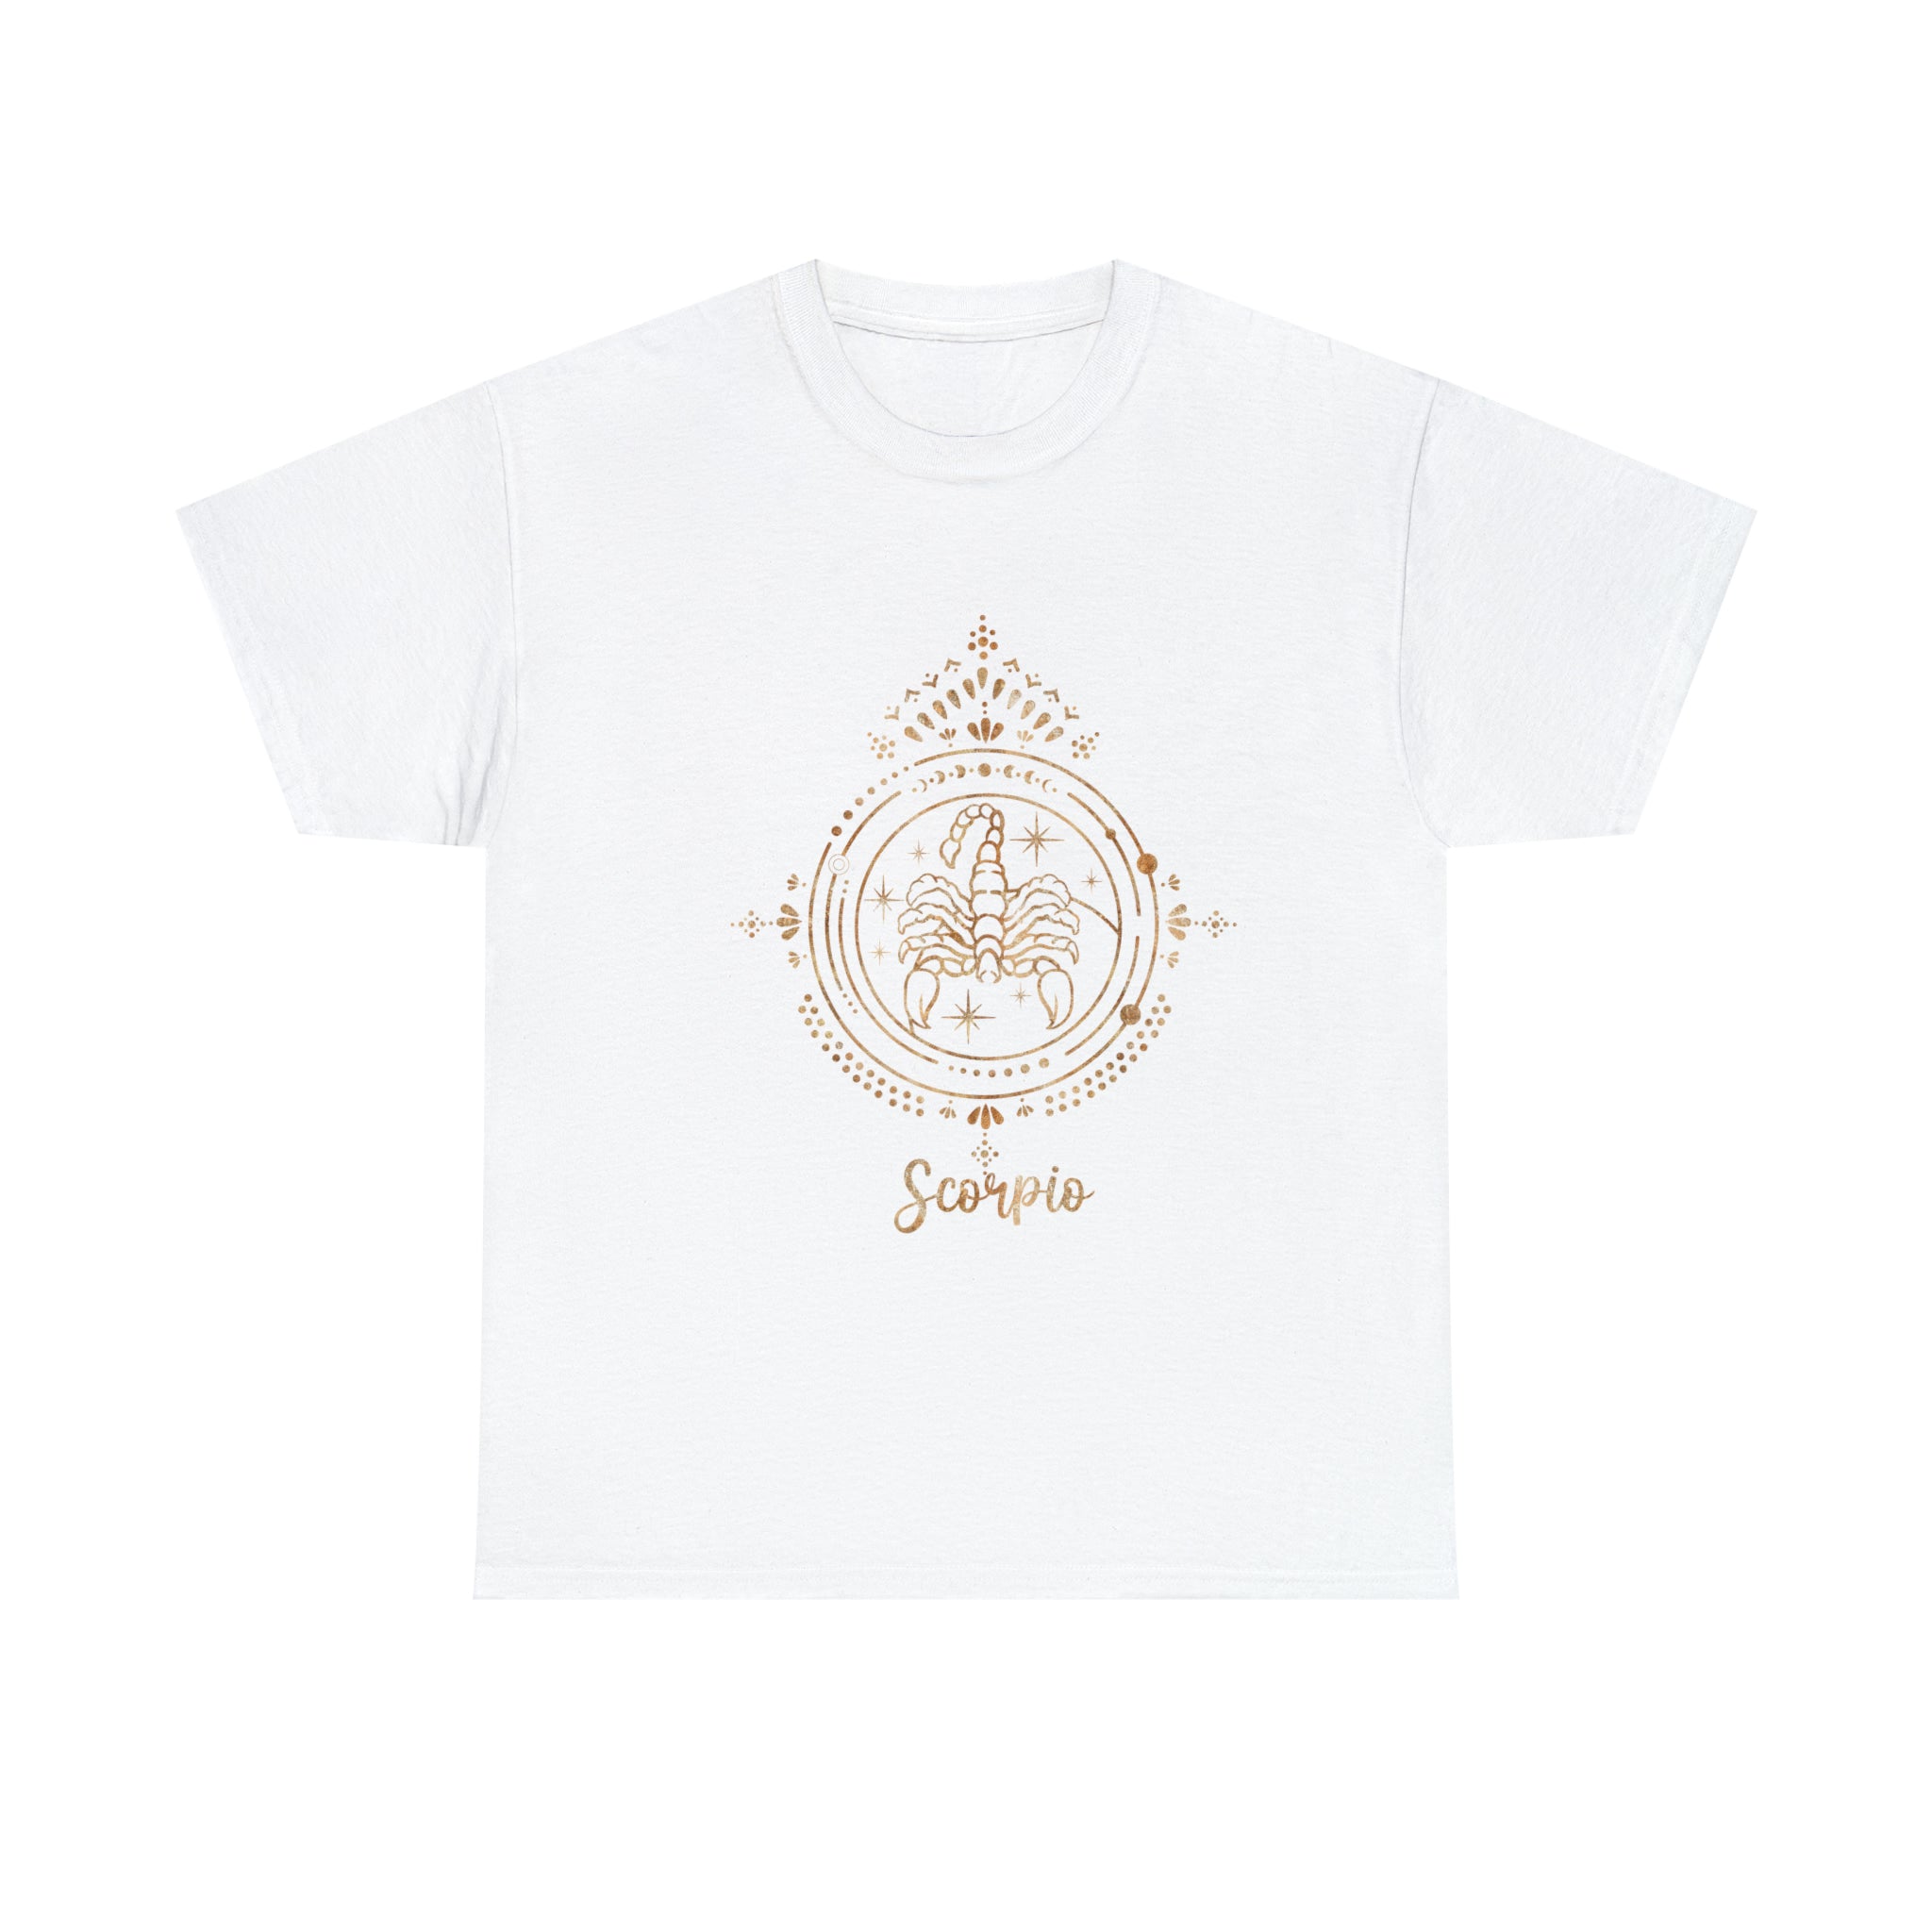 A passionate Scorpio T-Shirt adorned with an intense image of a compass.